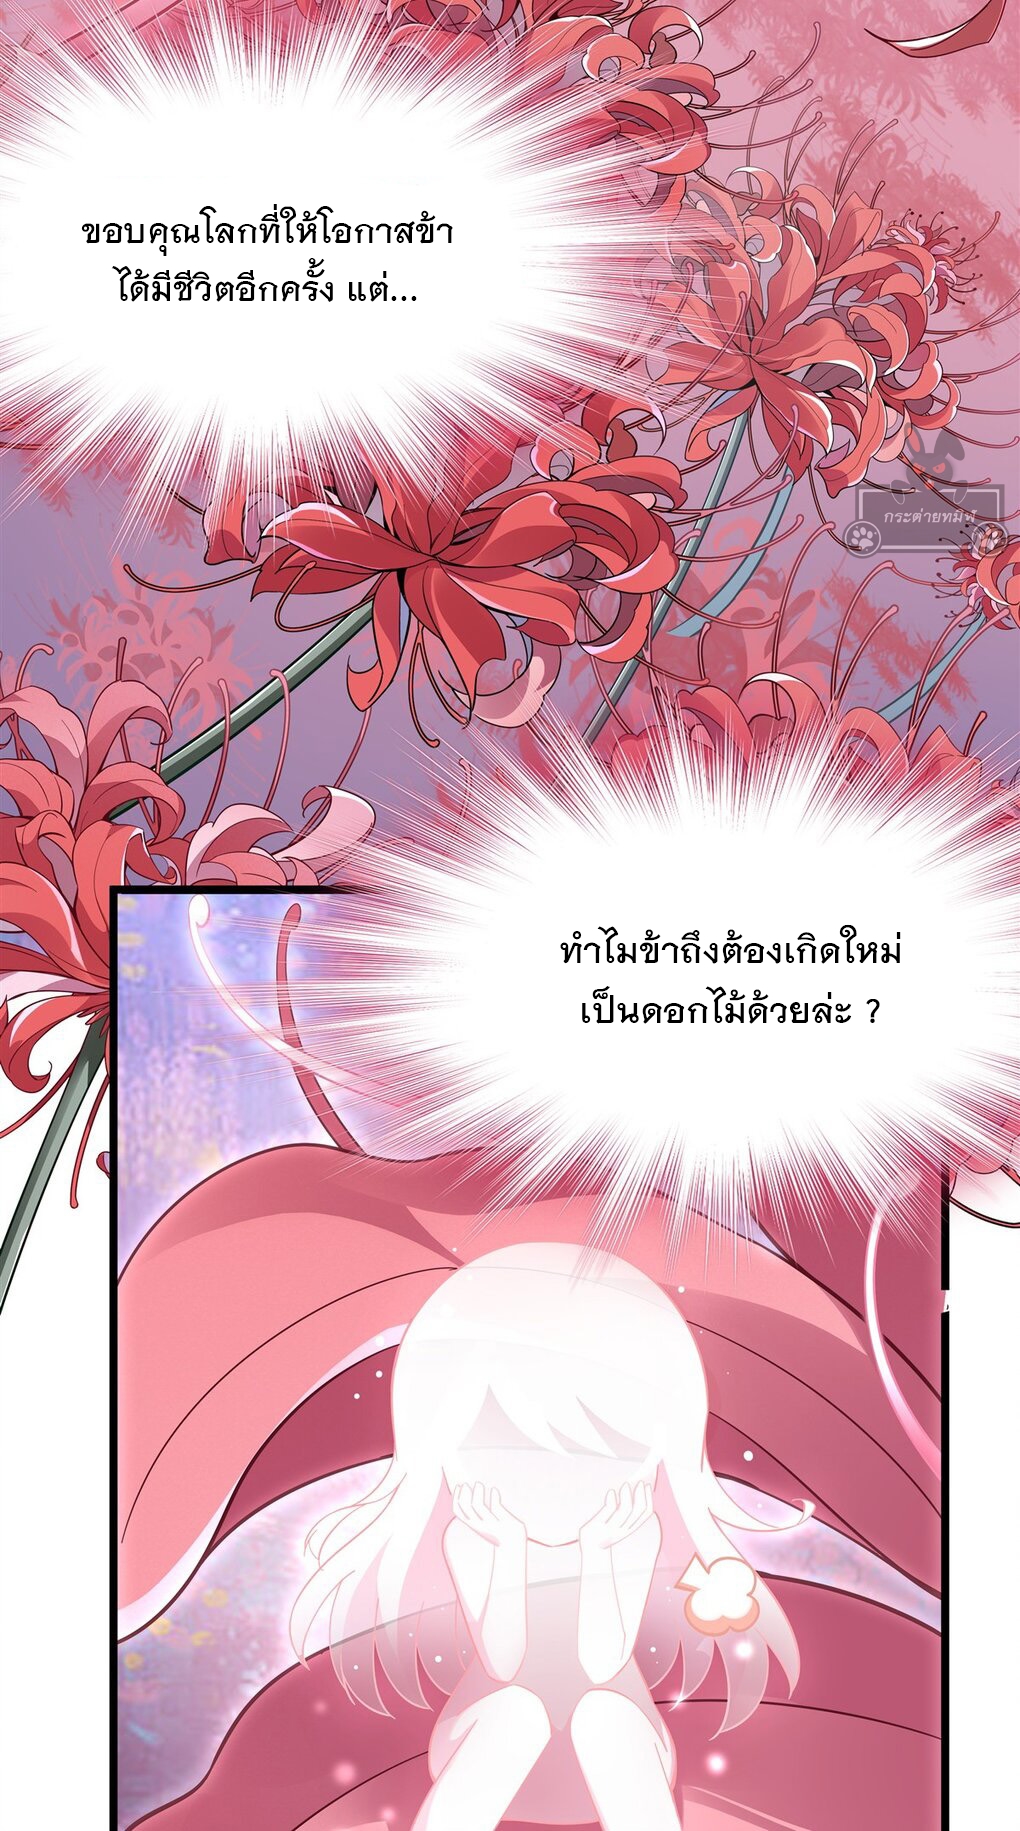 My Female Apprentices Are All Big Shots From the Future Ã Â¸â€¢Ã Â¸Â­Ã Â¸â„¢Ã Â¸â€”Ã Â¸ÂµÃ Â¹Ë† 91 (33)